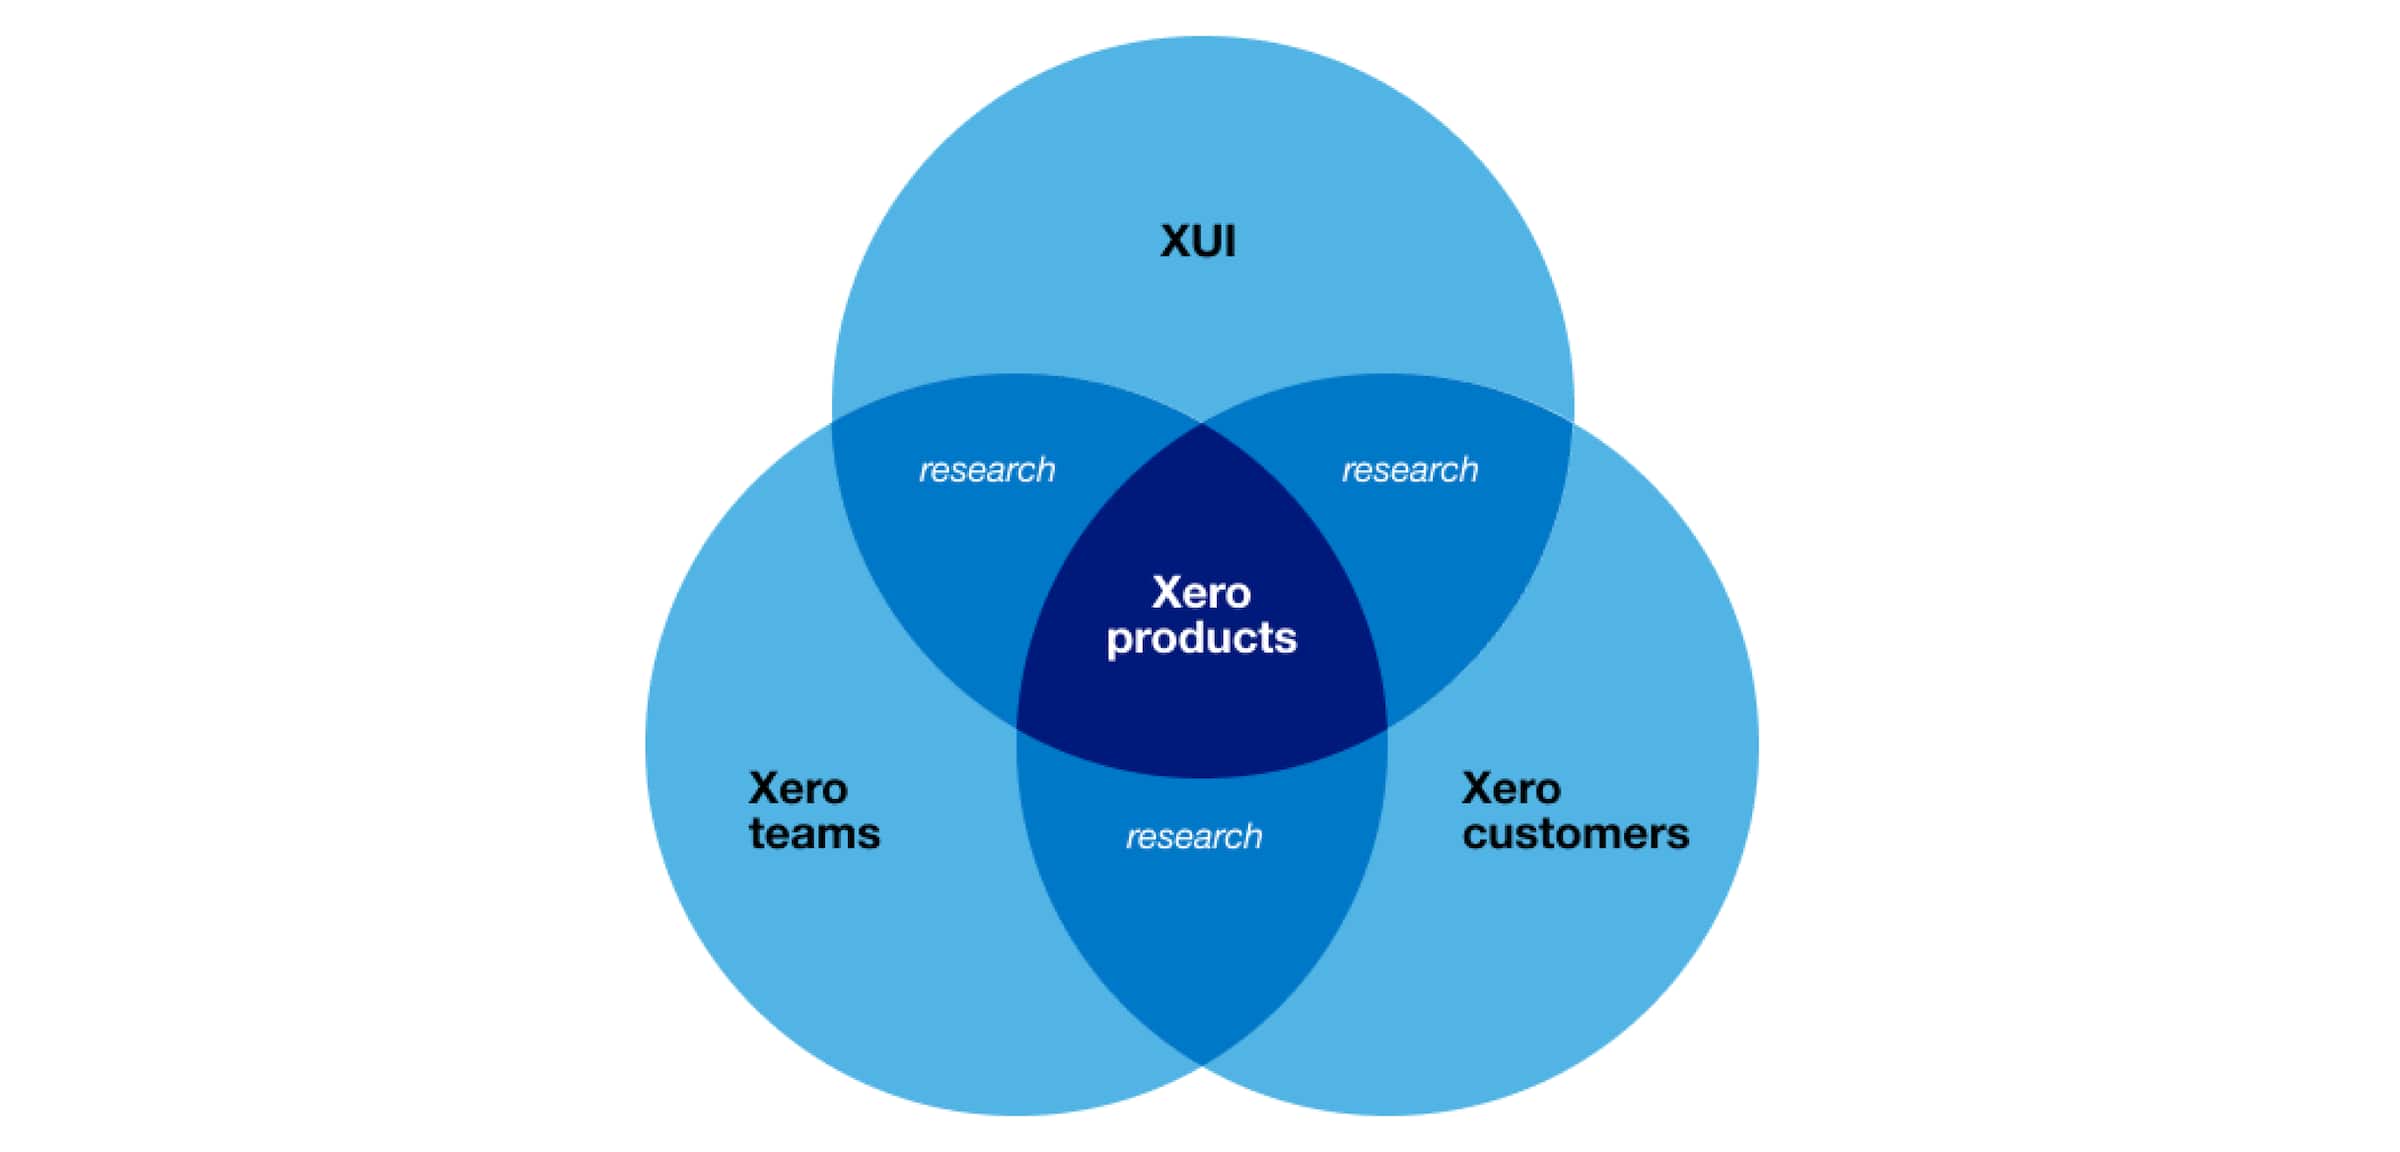 A Venn diagram showing XUI striving to do research with two audiences: Xero customers and Xero teams.